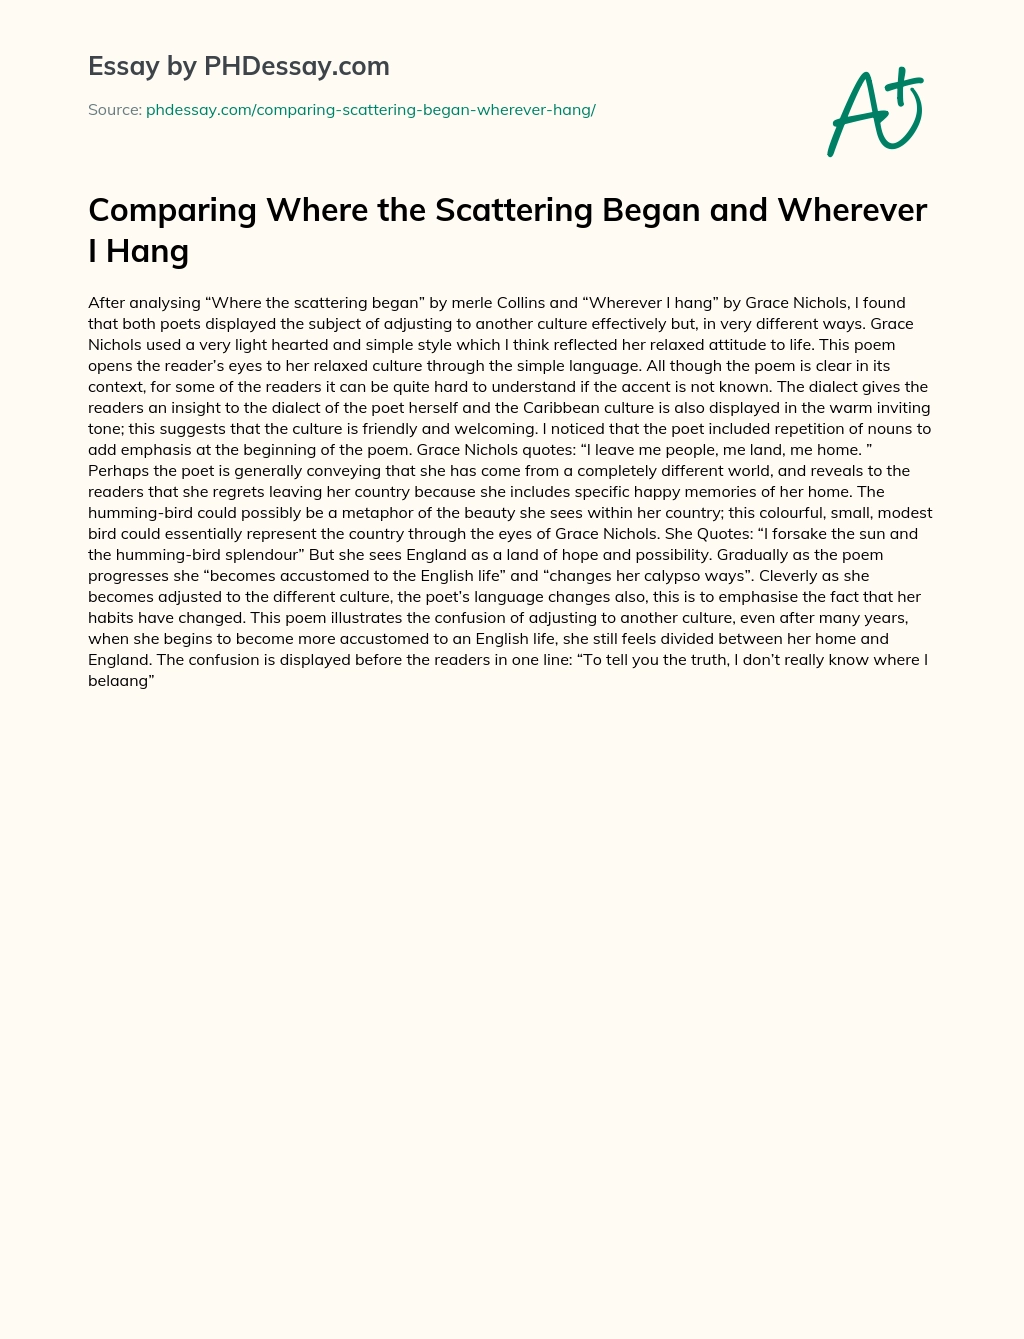 Comparing Where the Scattering Began and Wherever I Hang essay